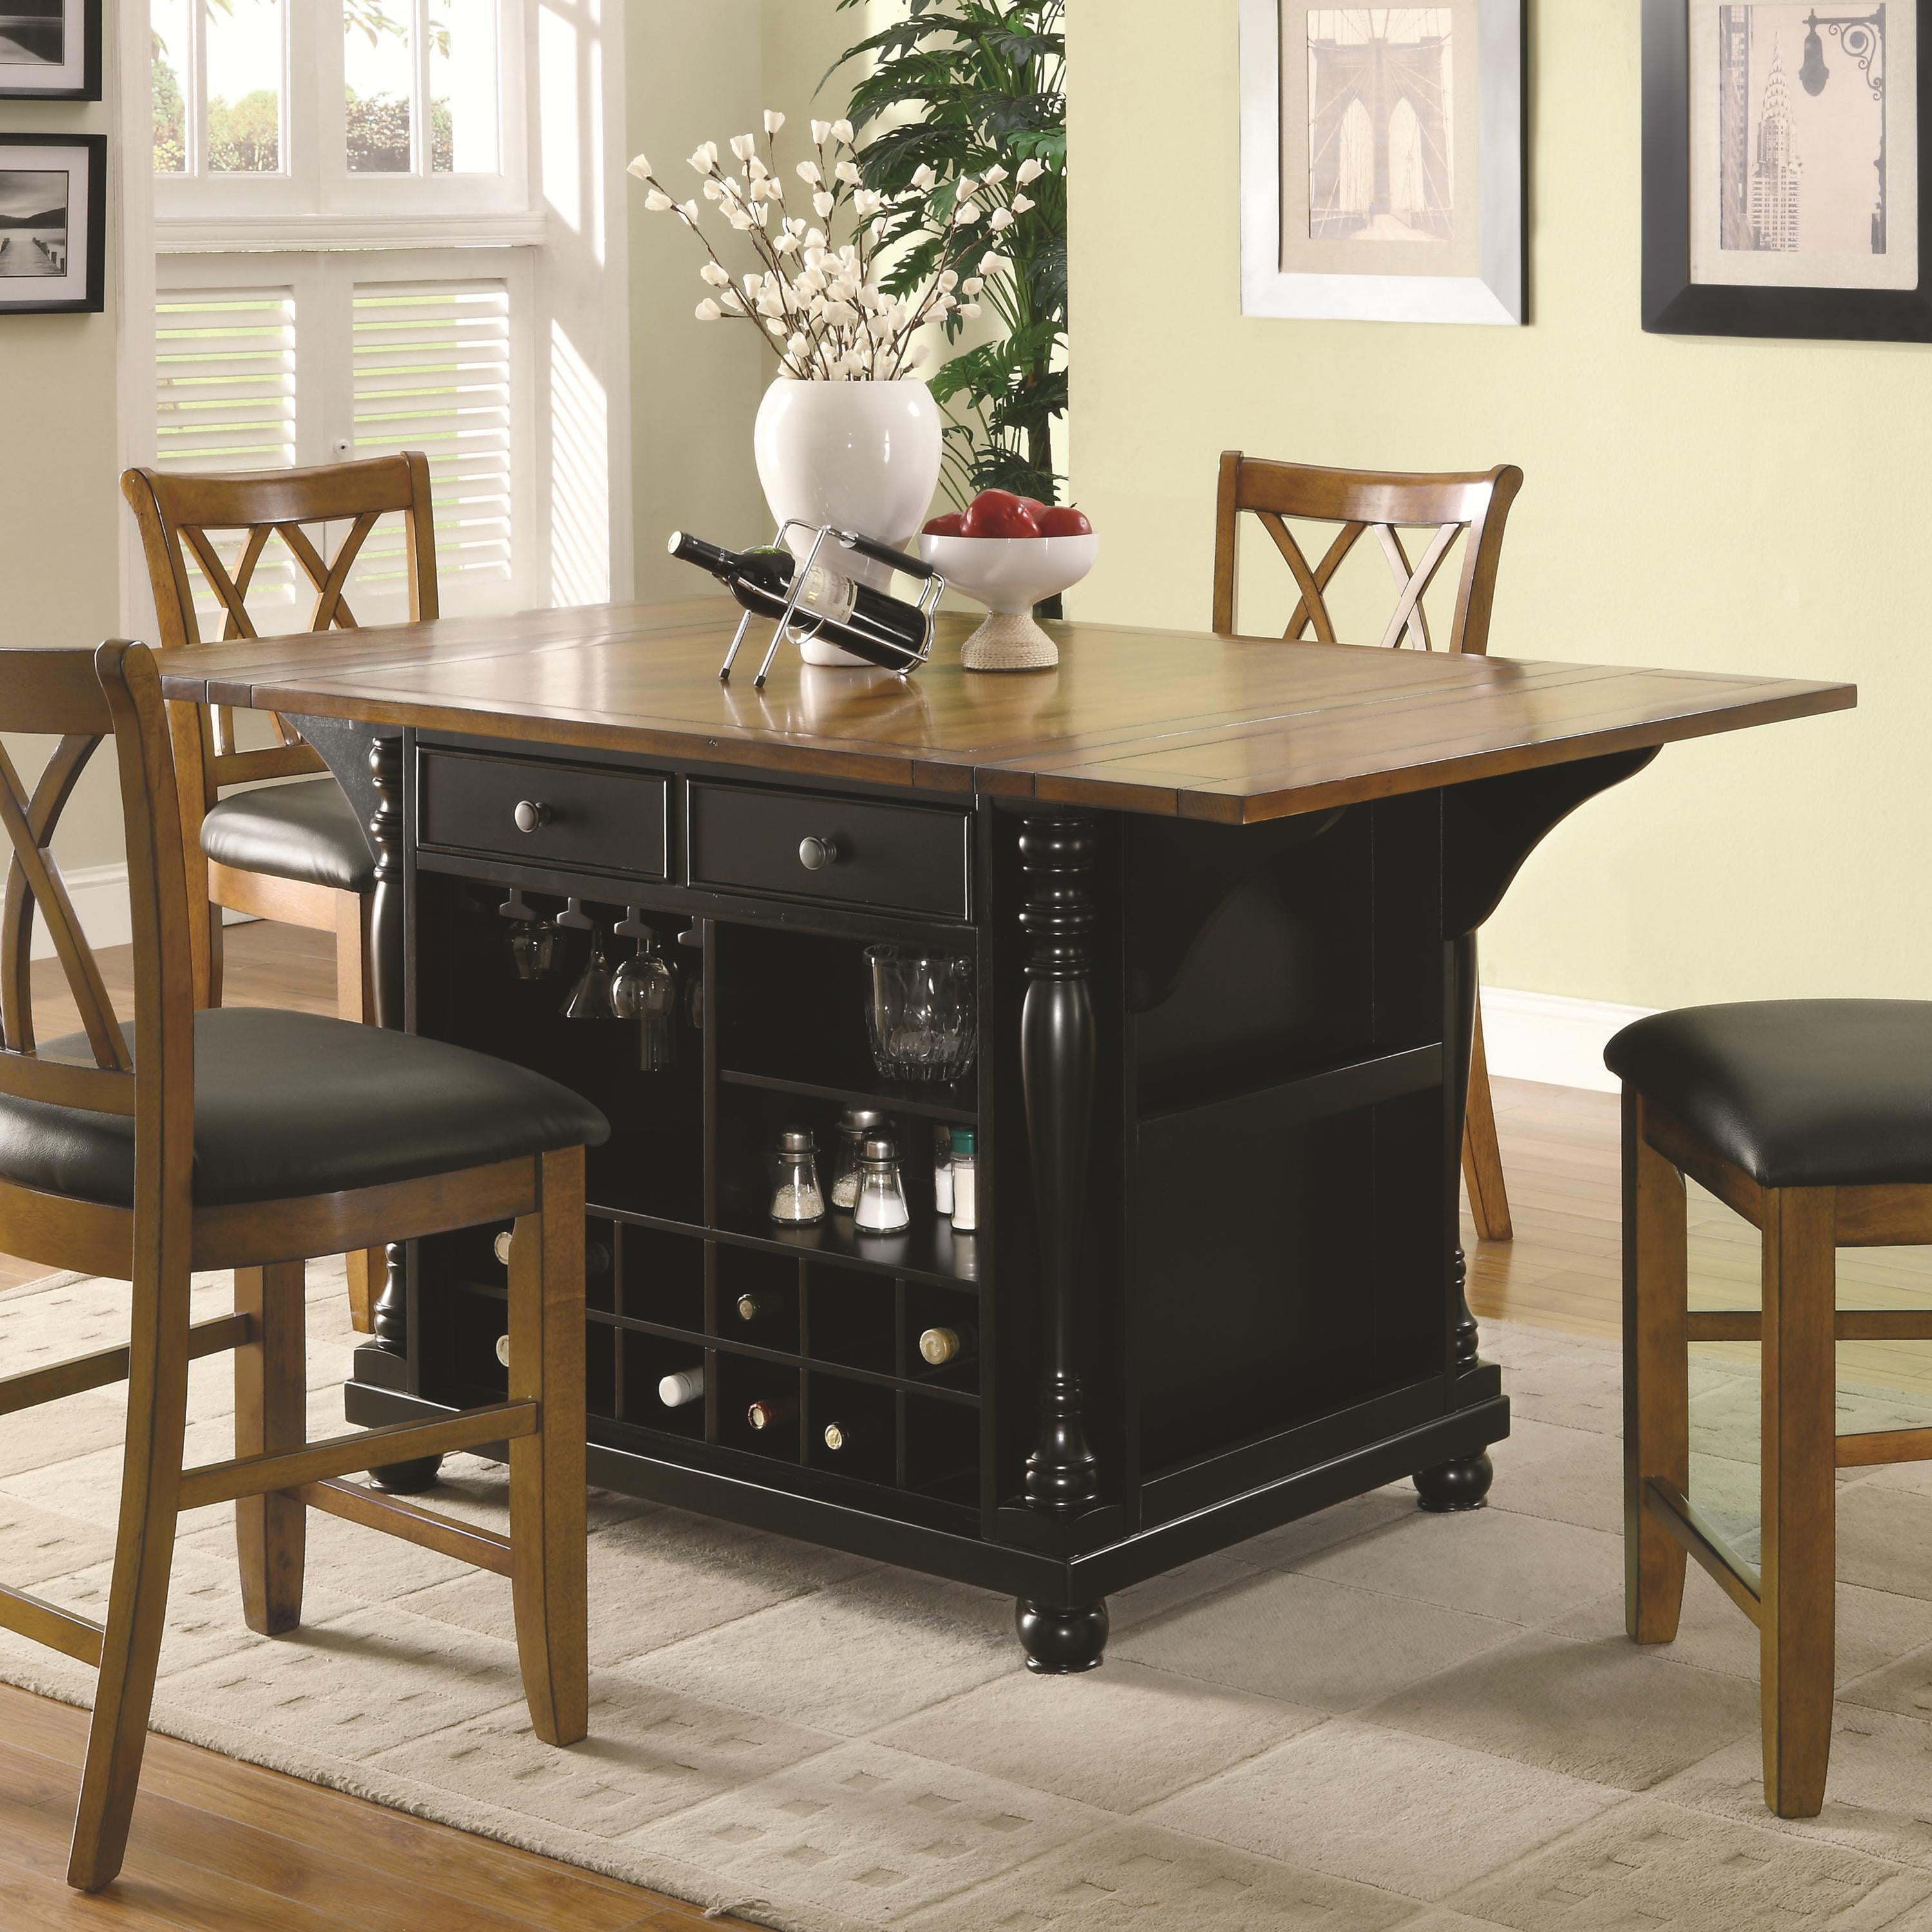 Large Scale Kitchen Island in Black and Cherry Finish